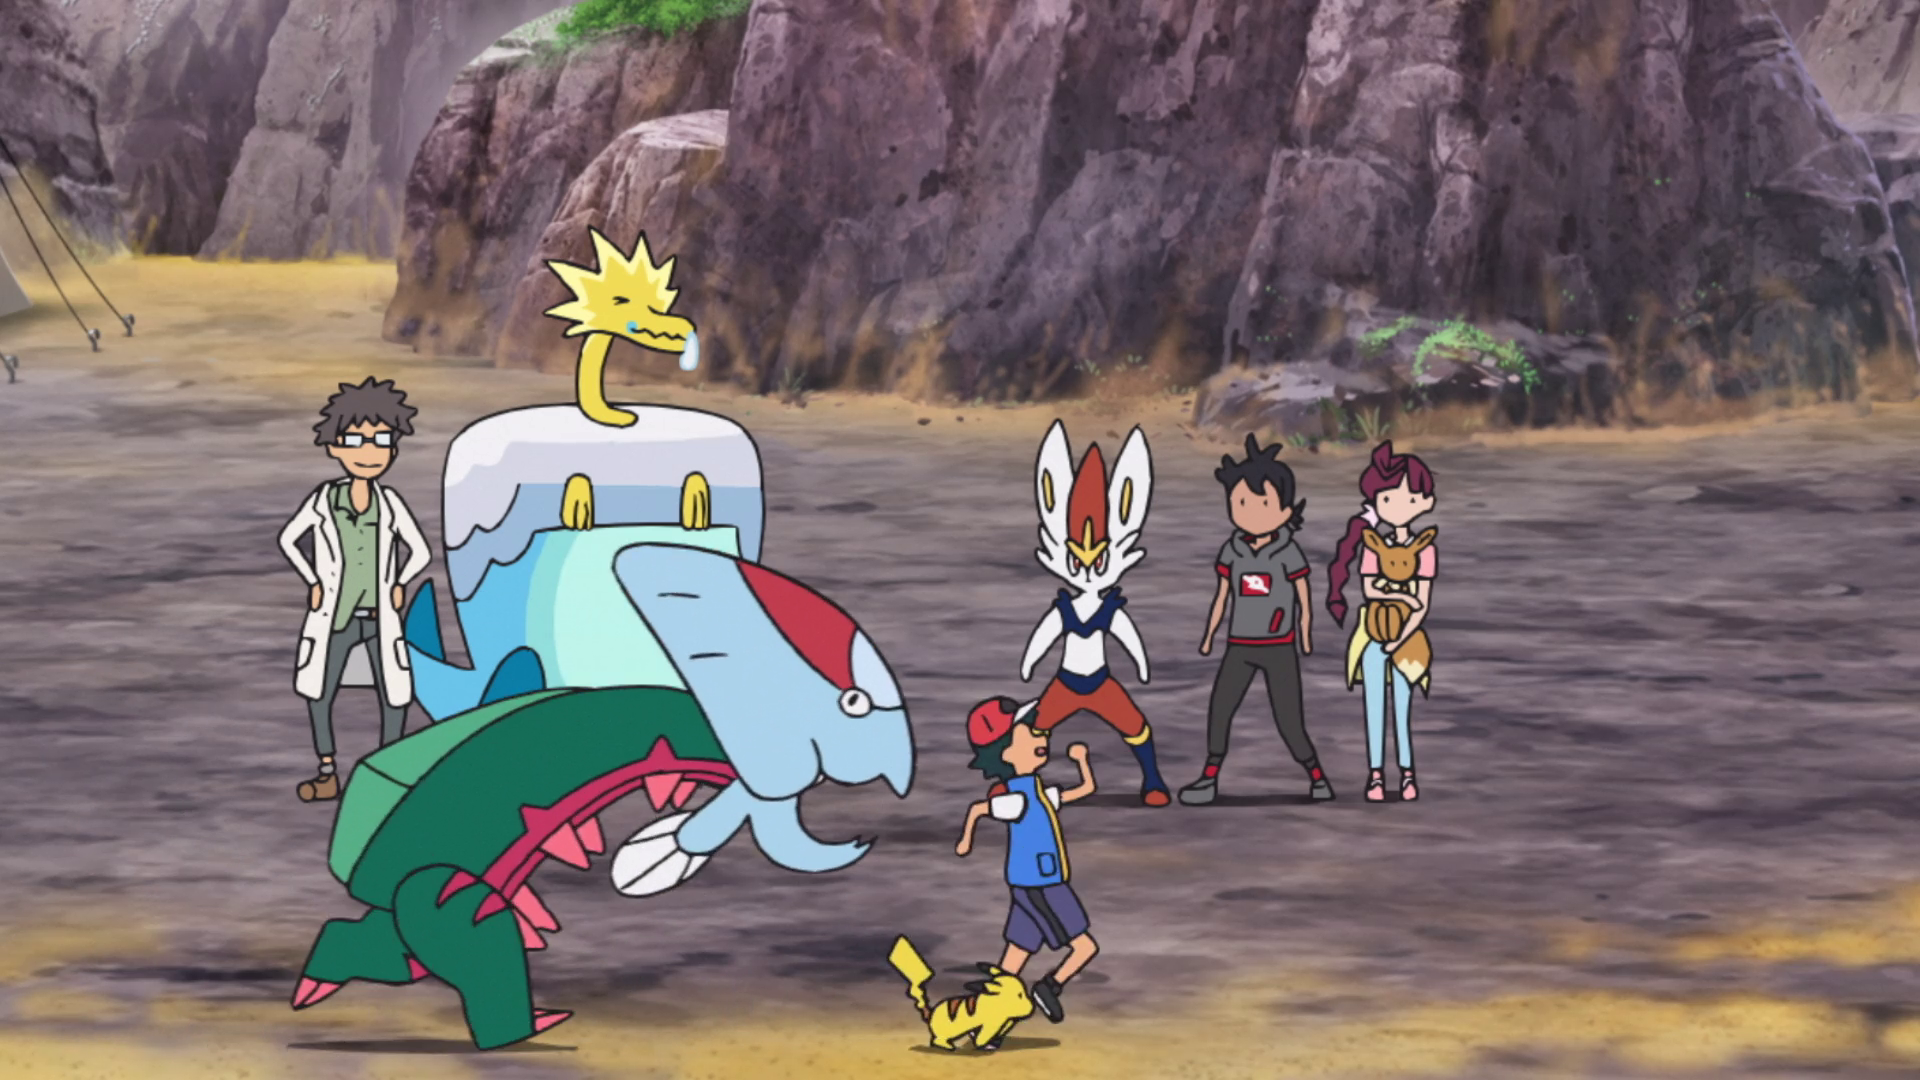 Current Mood: Low Res Background Goh Watching Ash Get Chased By Dracovish. Pokémon Sword And Shield